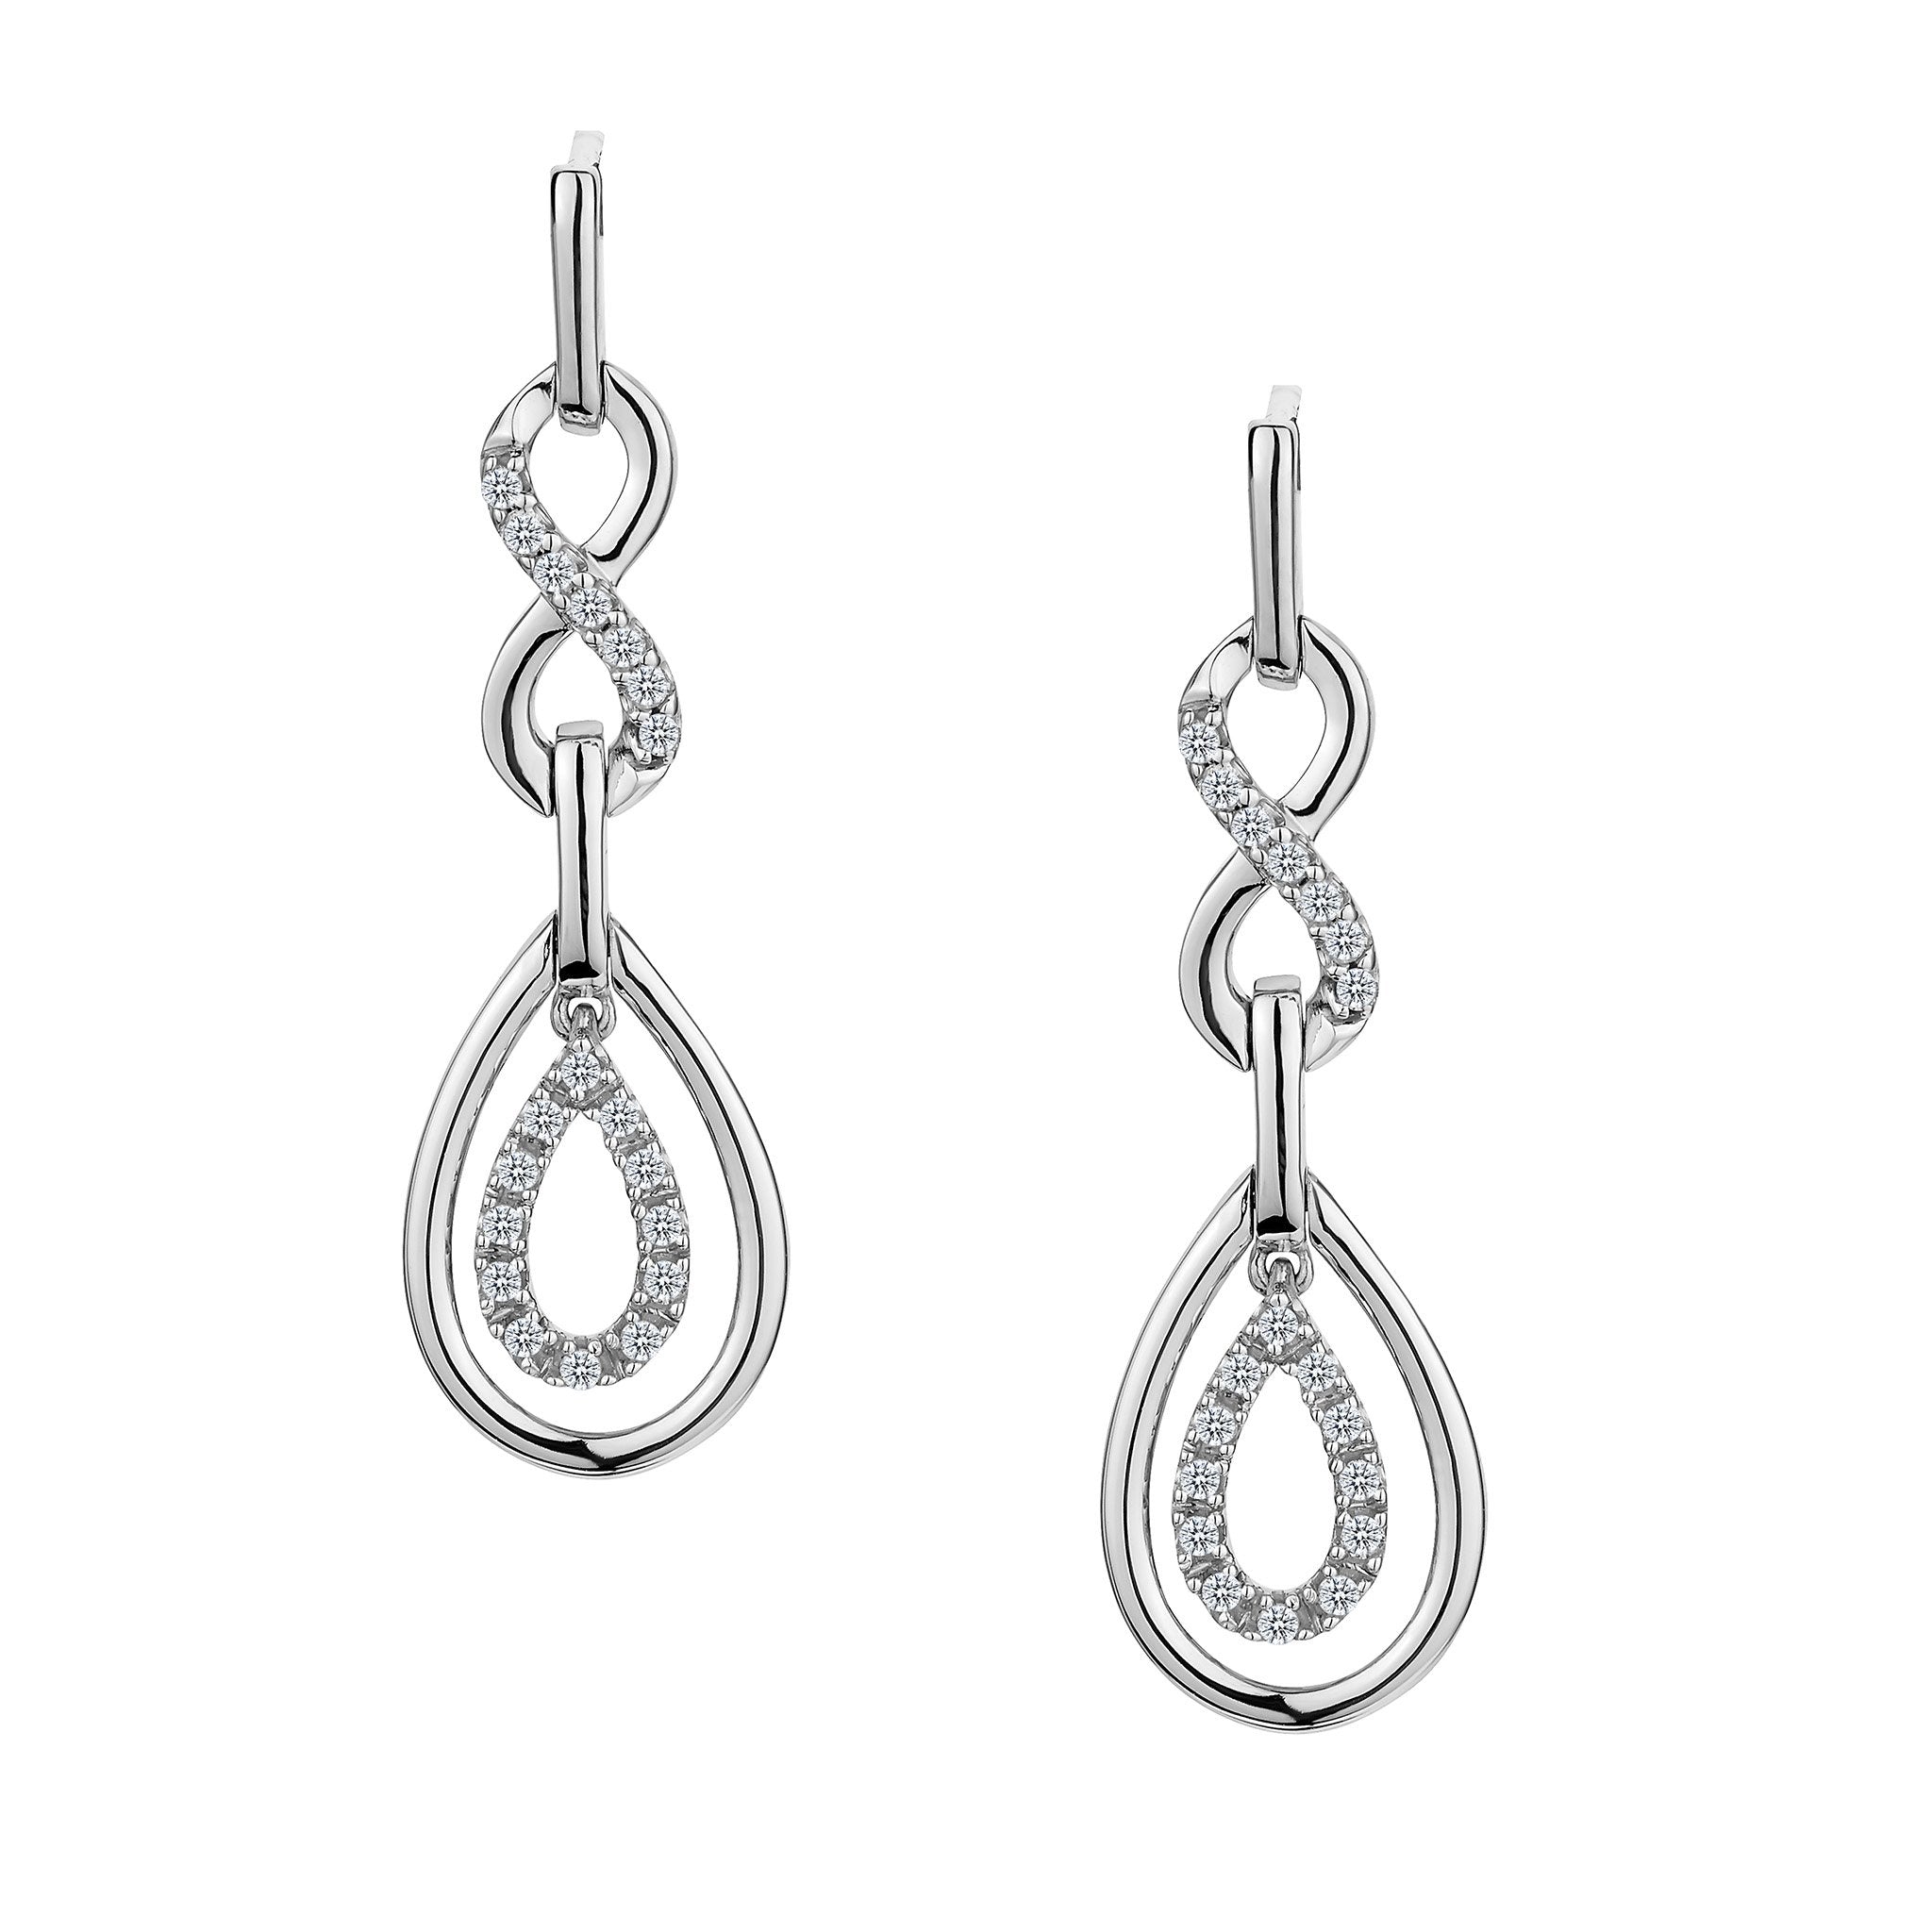 .16 Carat Diamond Infinity Drop Pave Stud Earrings,  10kt White Gold. Griffin Jewellery Designs